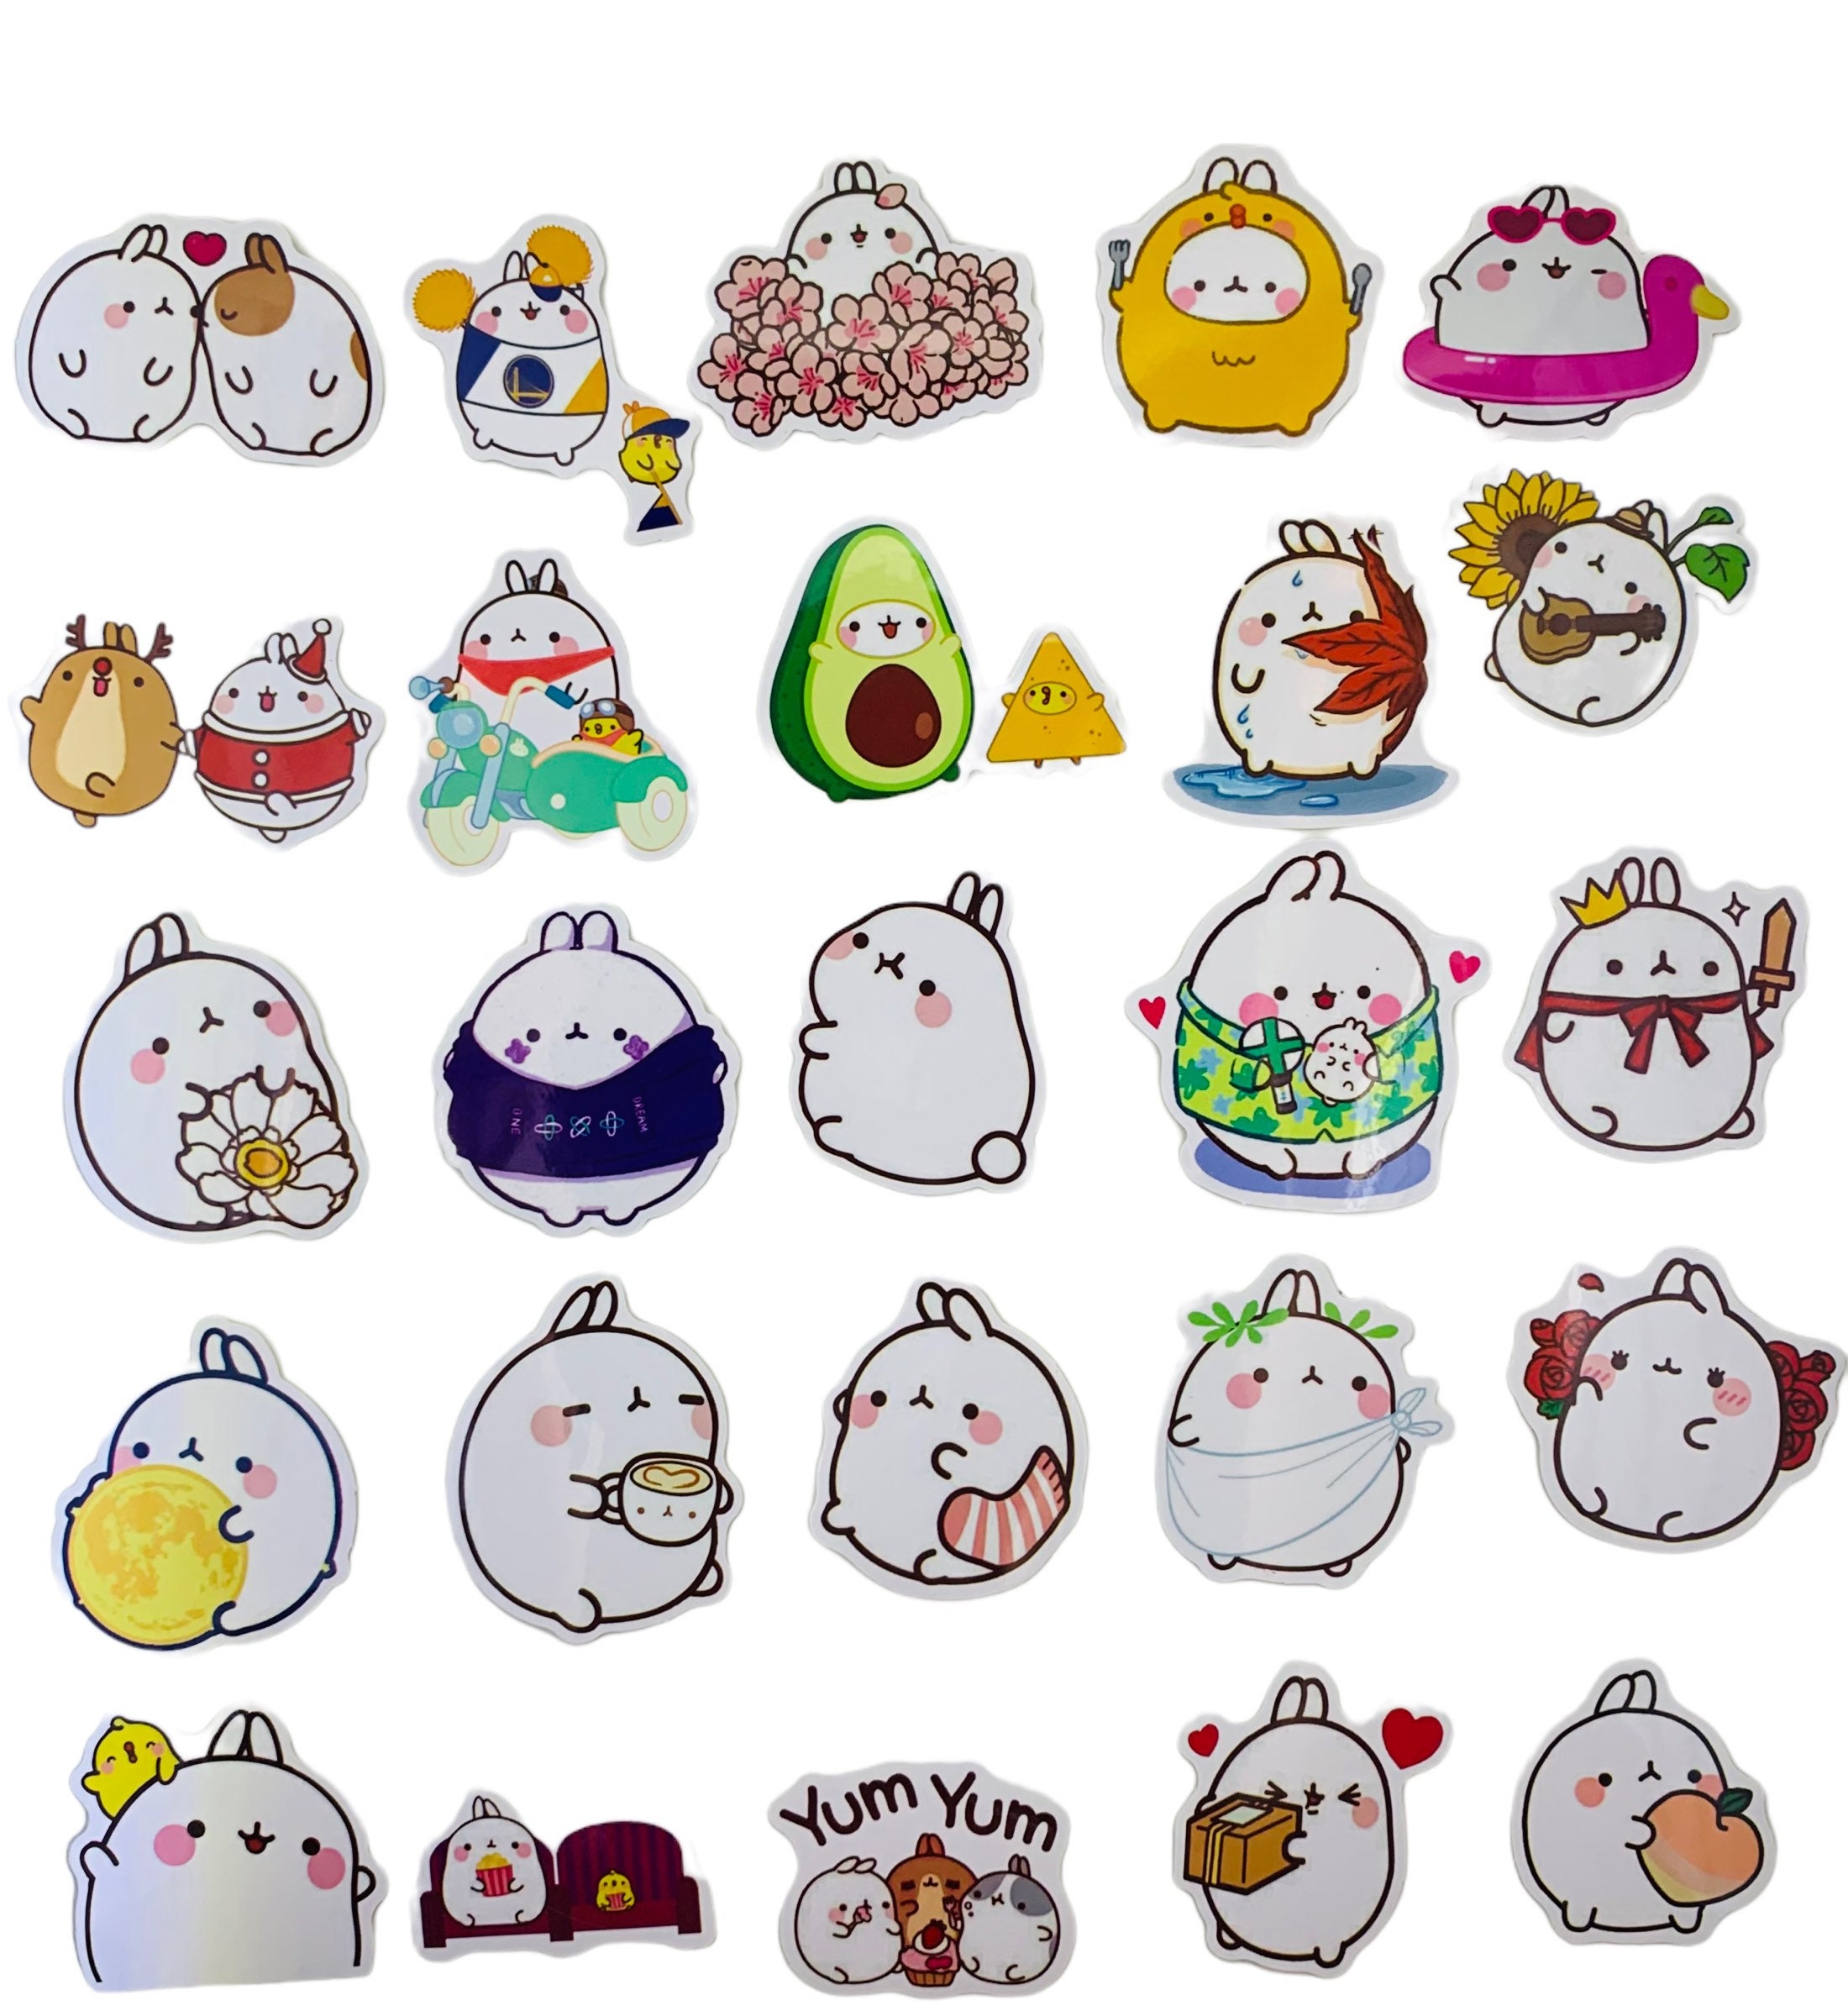 Kawaii Adorable Molang Stickers 50 Stickers - Etsy